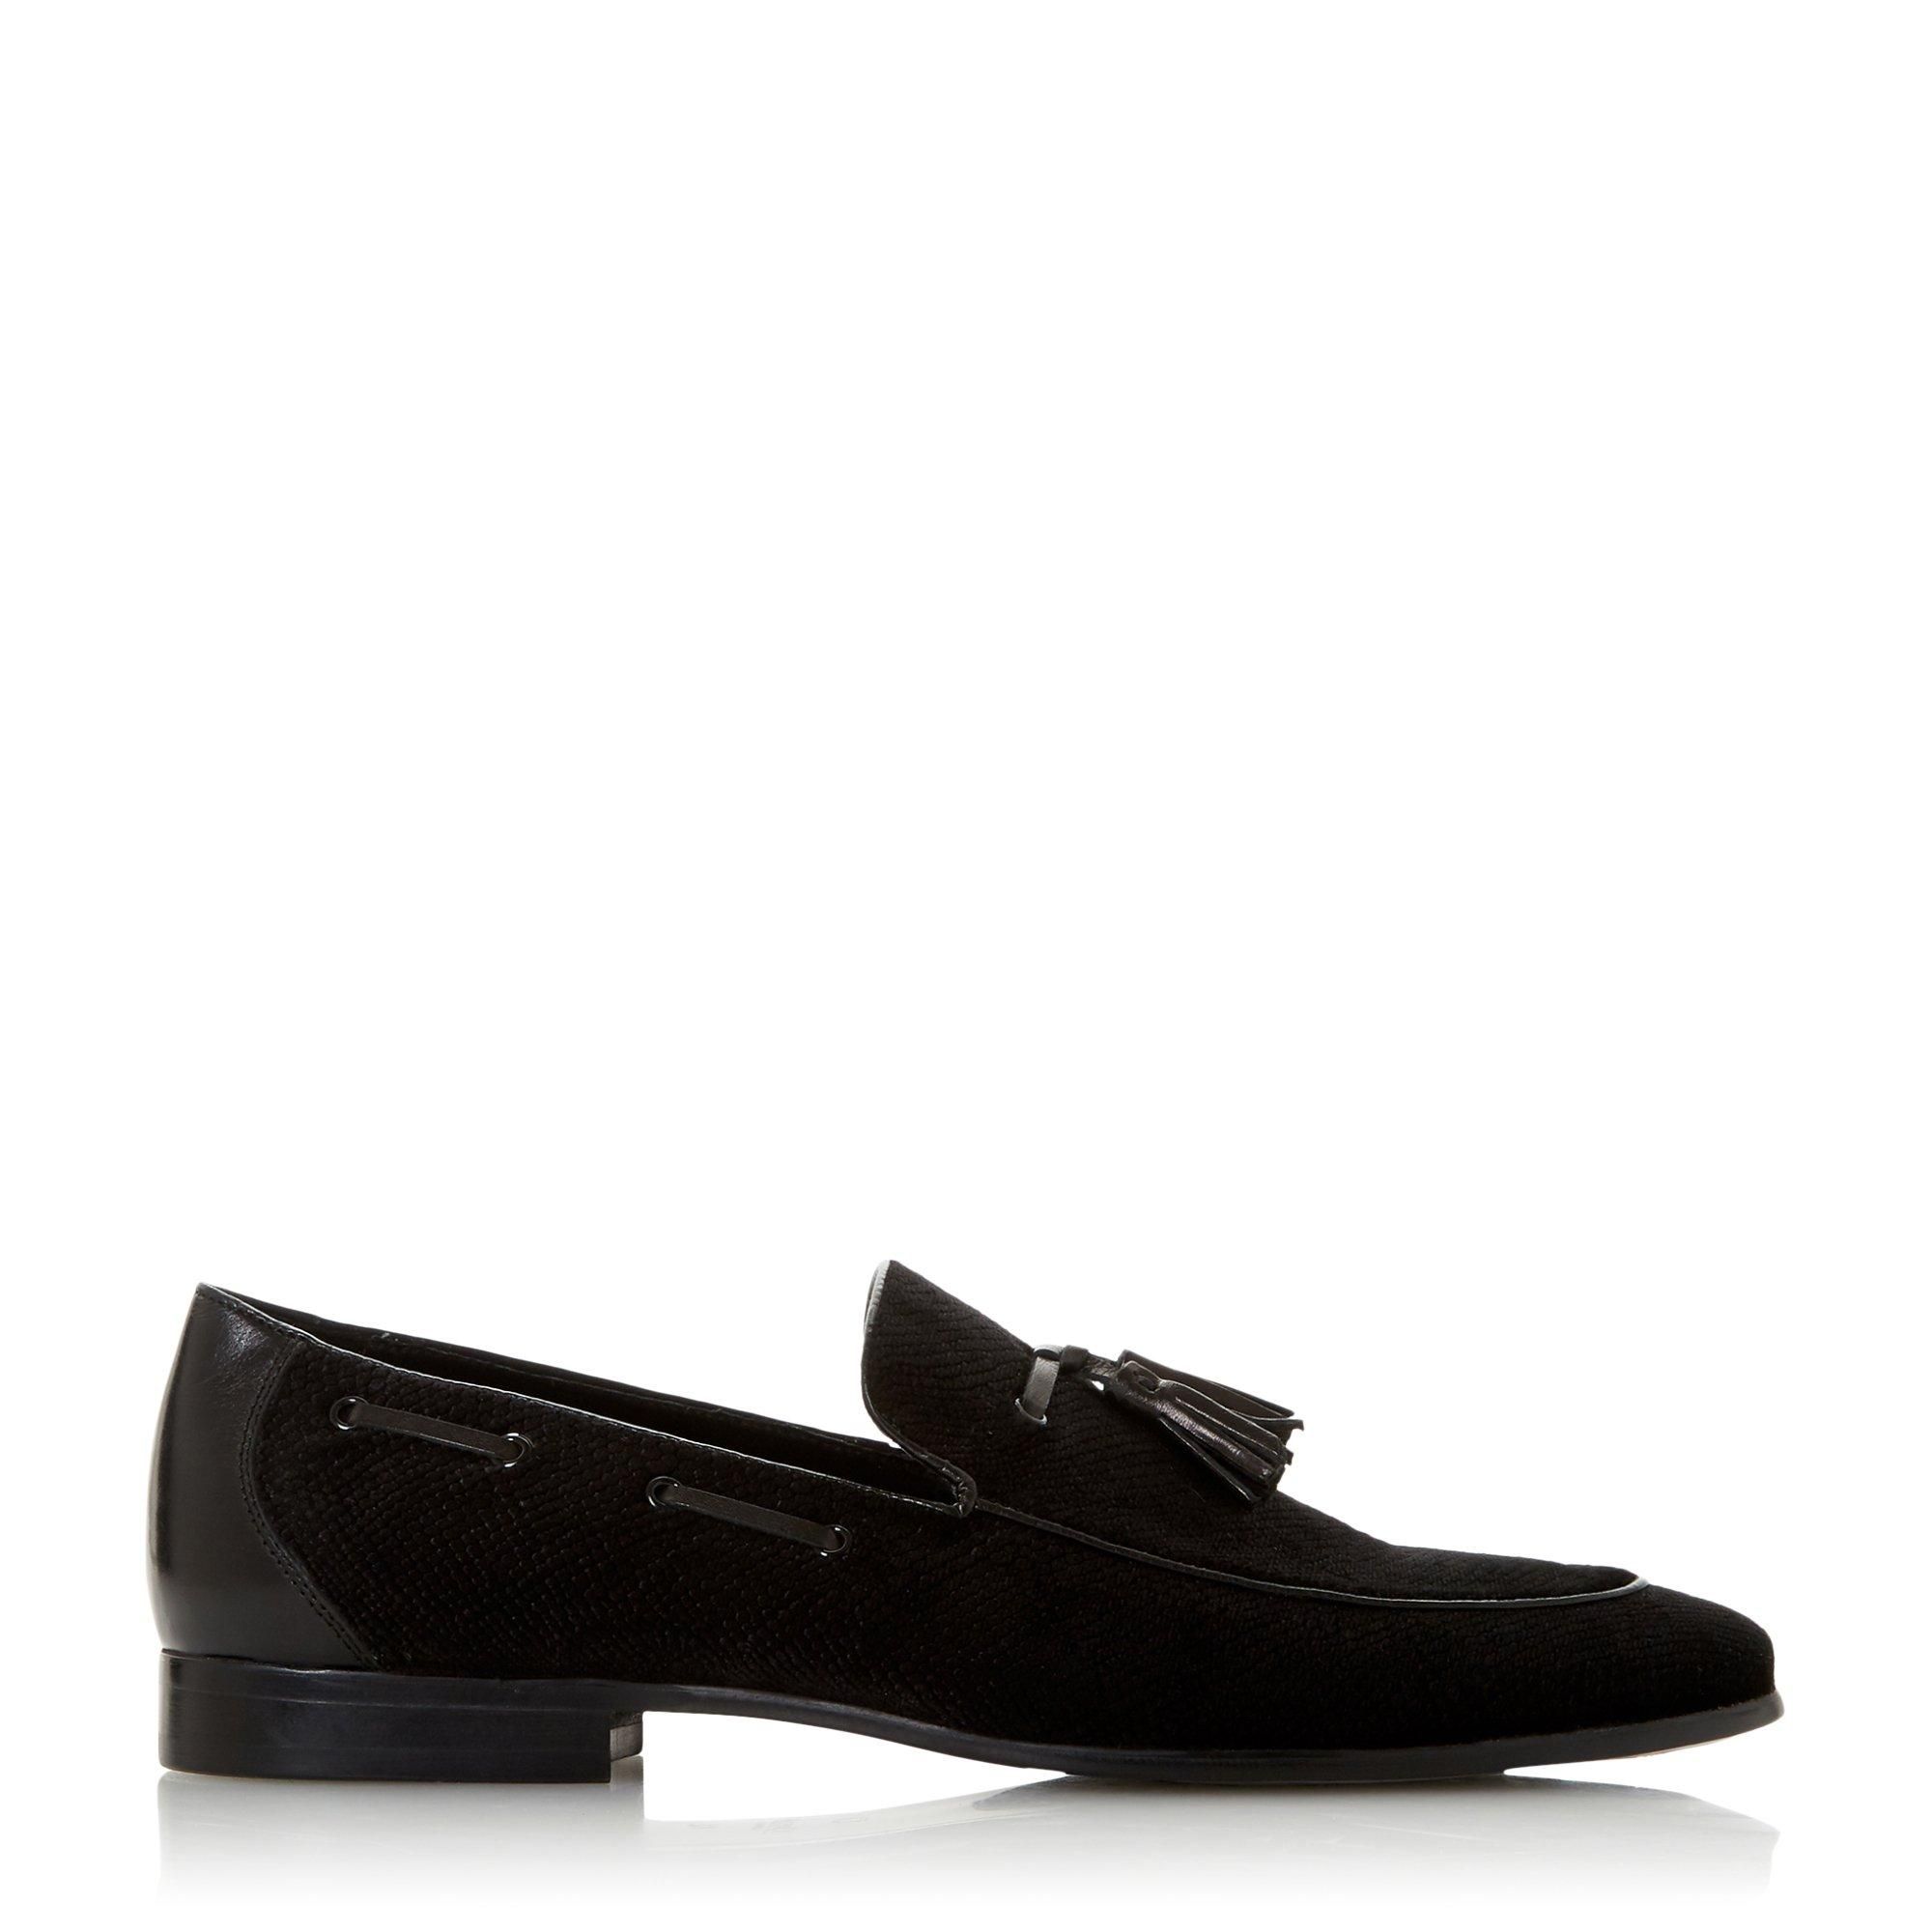 Upgrade your smart and casual ensembles with Dune's Stingray Loafer... Textured  it features a double tassel trim and classic apron stitching... A low block heel  around toe and contrast trims complete the design...